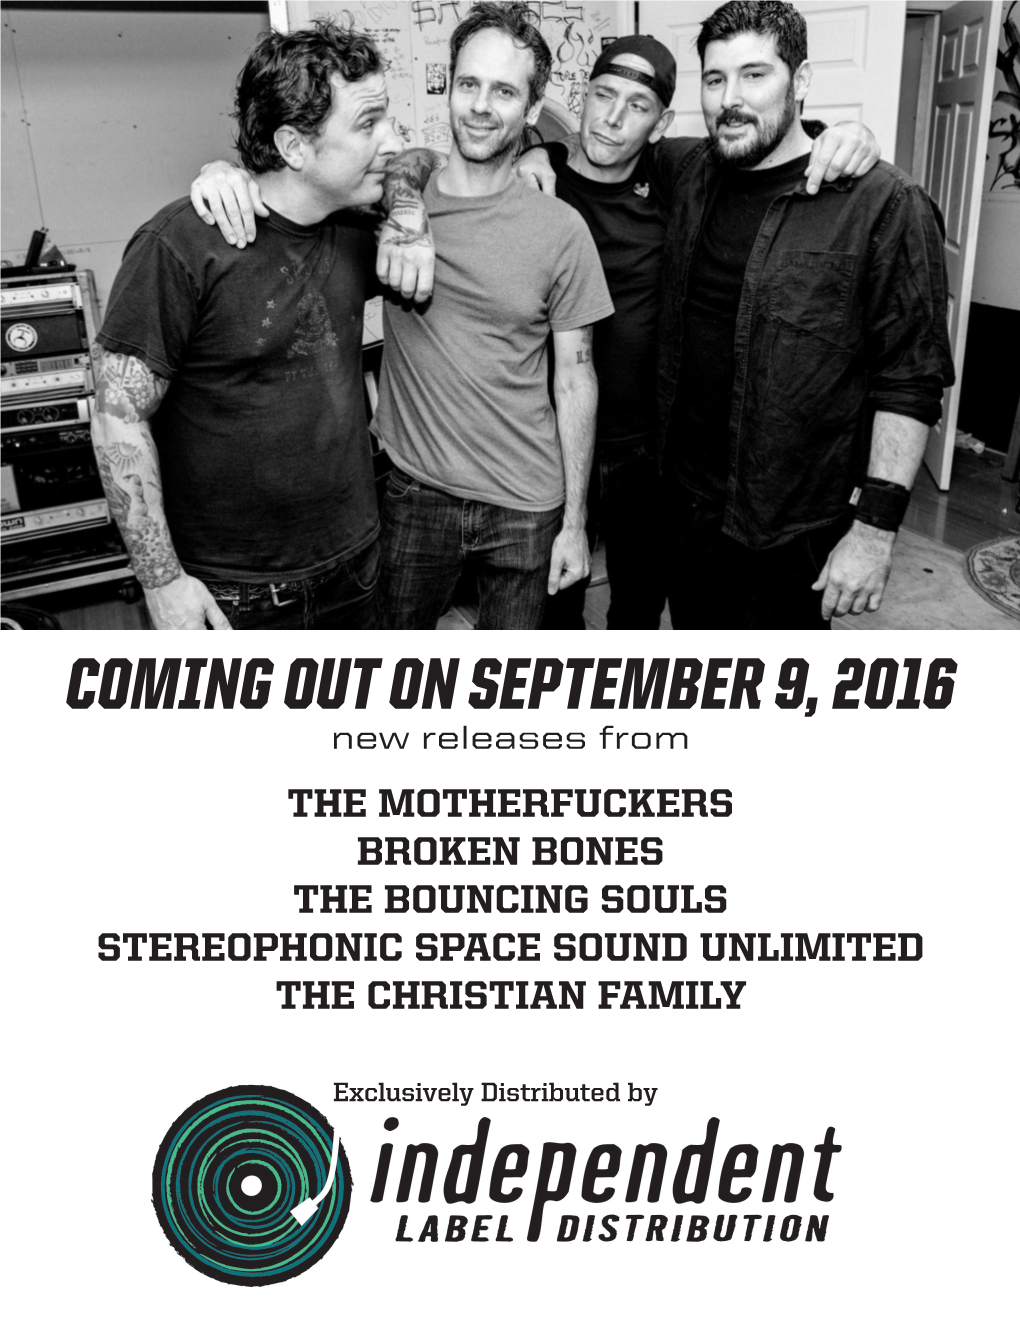 COMING out on SEPTEMBER 9, 2016 New Releases from the MOTHERFUCKERS BROKEN BONES the BOUNCING SOULS STEREOPHONIC SPACE SOUND UNLIMITED the CHRISTIAN FAMILY